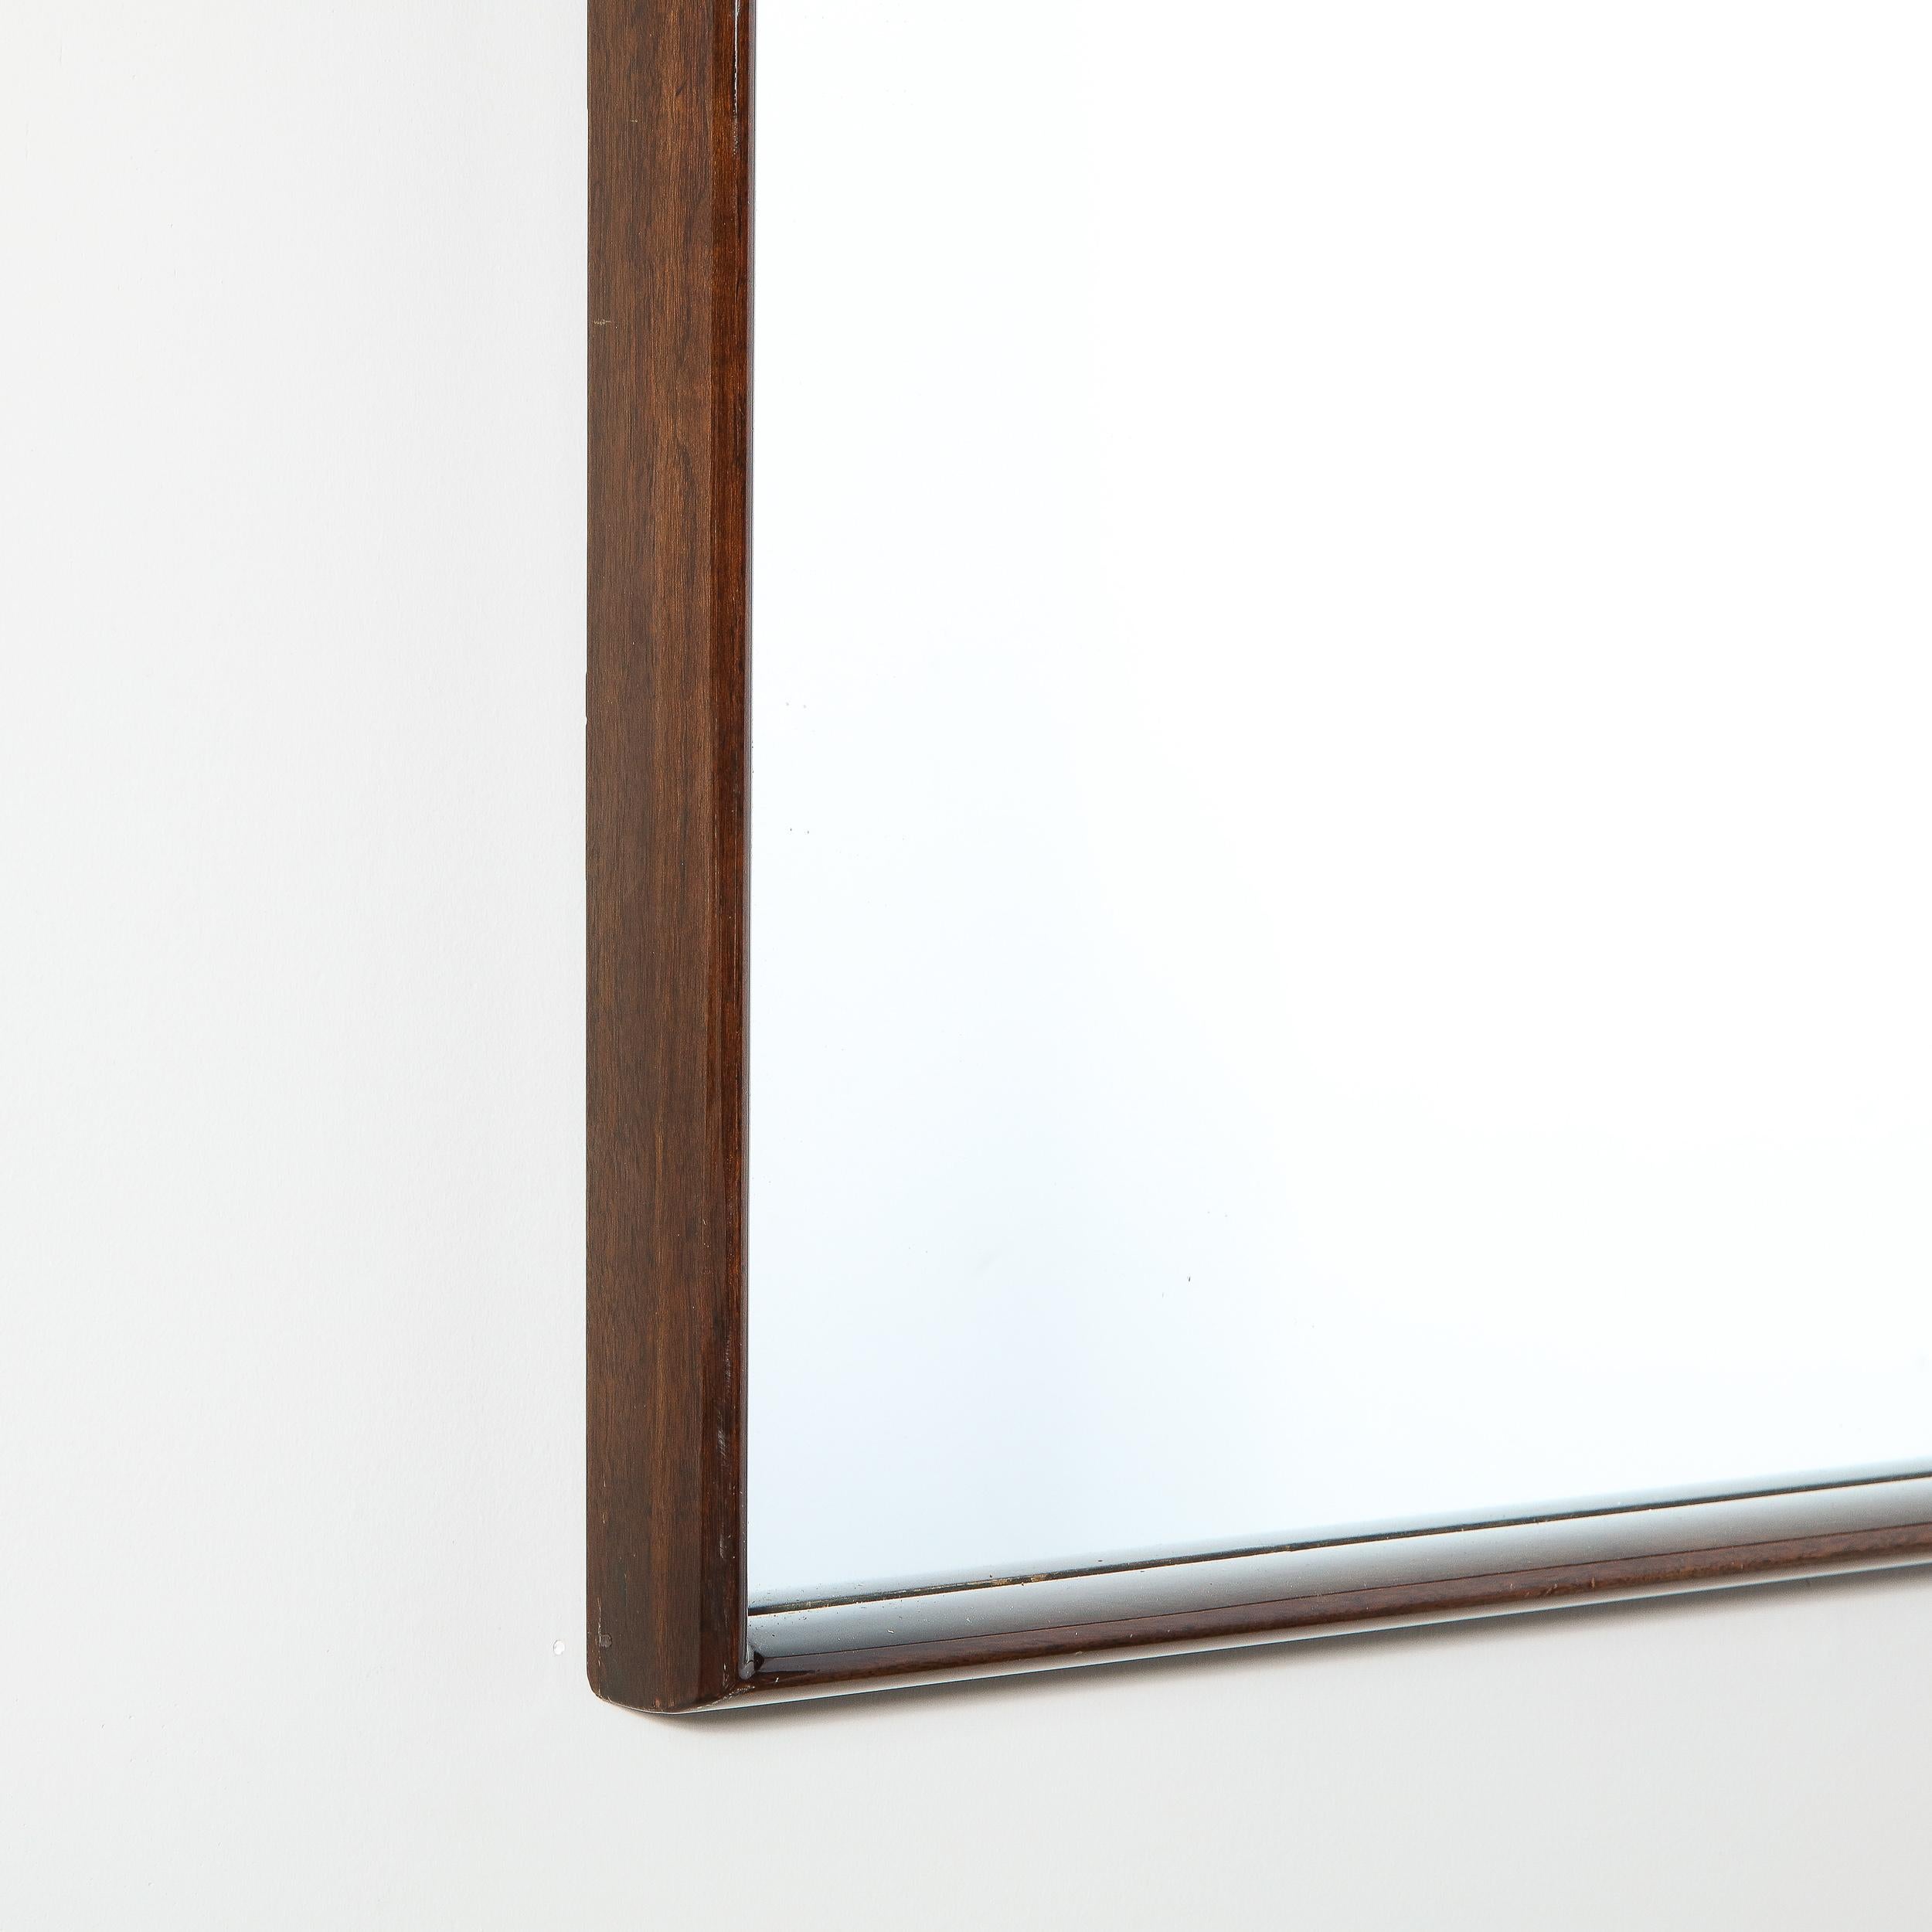 This elegant and austere mirror was designed by the legendary T.H. Robsjohn-Gibbings for Widdicomb Co. in the United States, circa 1950. It offers a clean rectangular shadowbox frame in handrubbed walnut circumscribing a plain mirror center. This